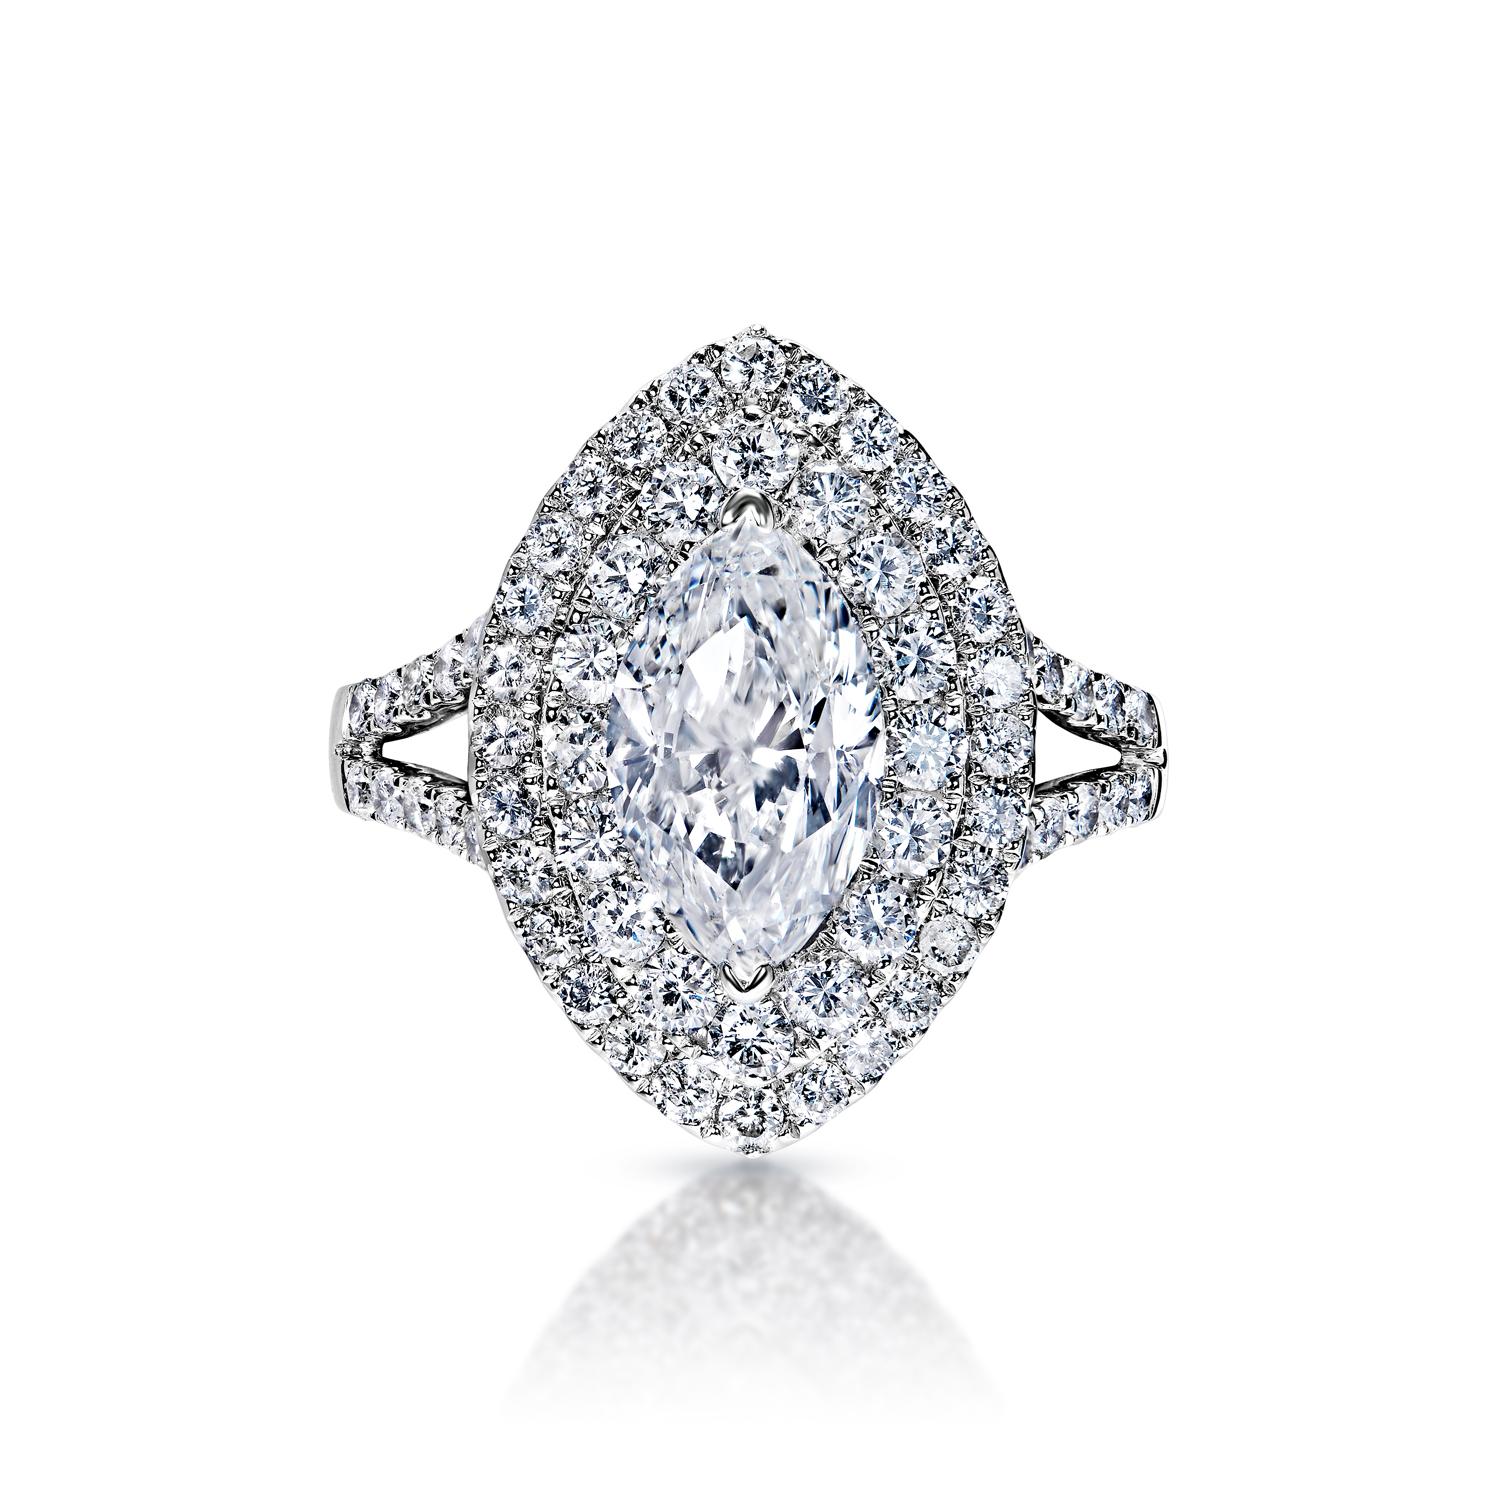 Malia 3 Carat D SI1 Marquise Cut Diamond Engagement Ring in 14k White Gold By Mike Nekta


Center Diamond:

Carat Weight: 2.01 Carats
Color : D
Clarity: SI1*
Style: Marquise Cut
*Clarity Enhanced 

Ring:
Settings: Split Shank. Double Halo
Metal: 14